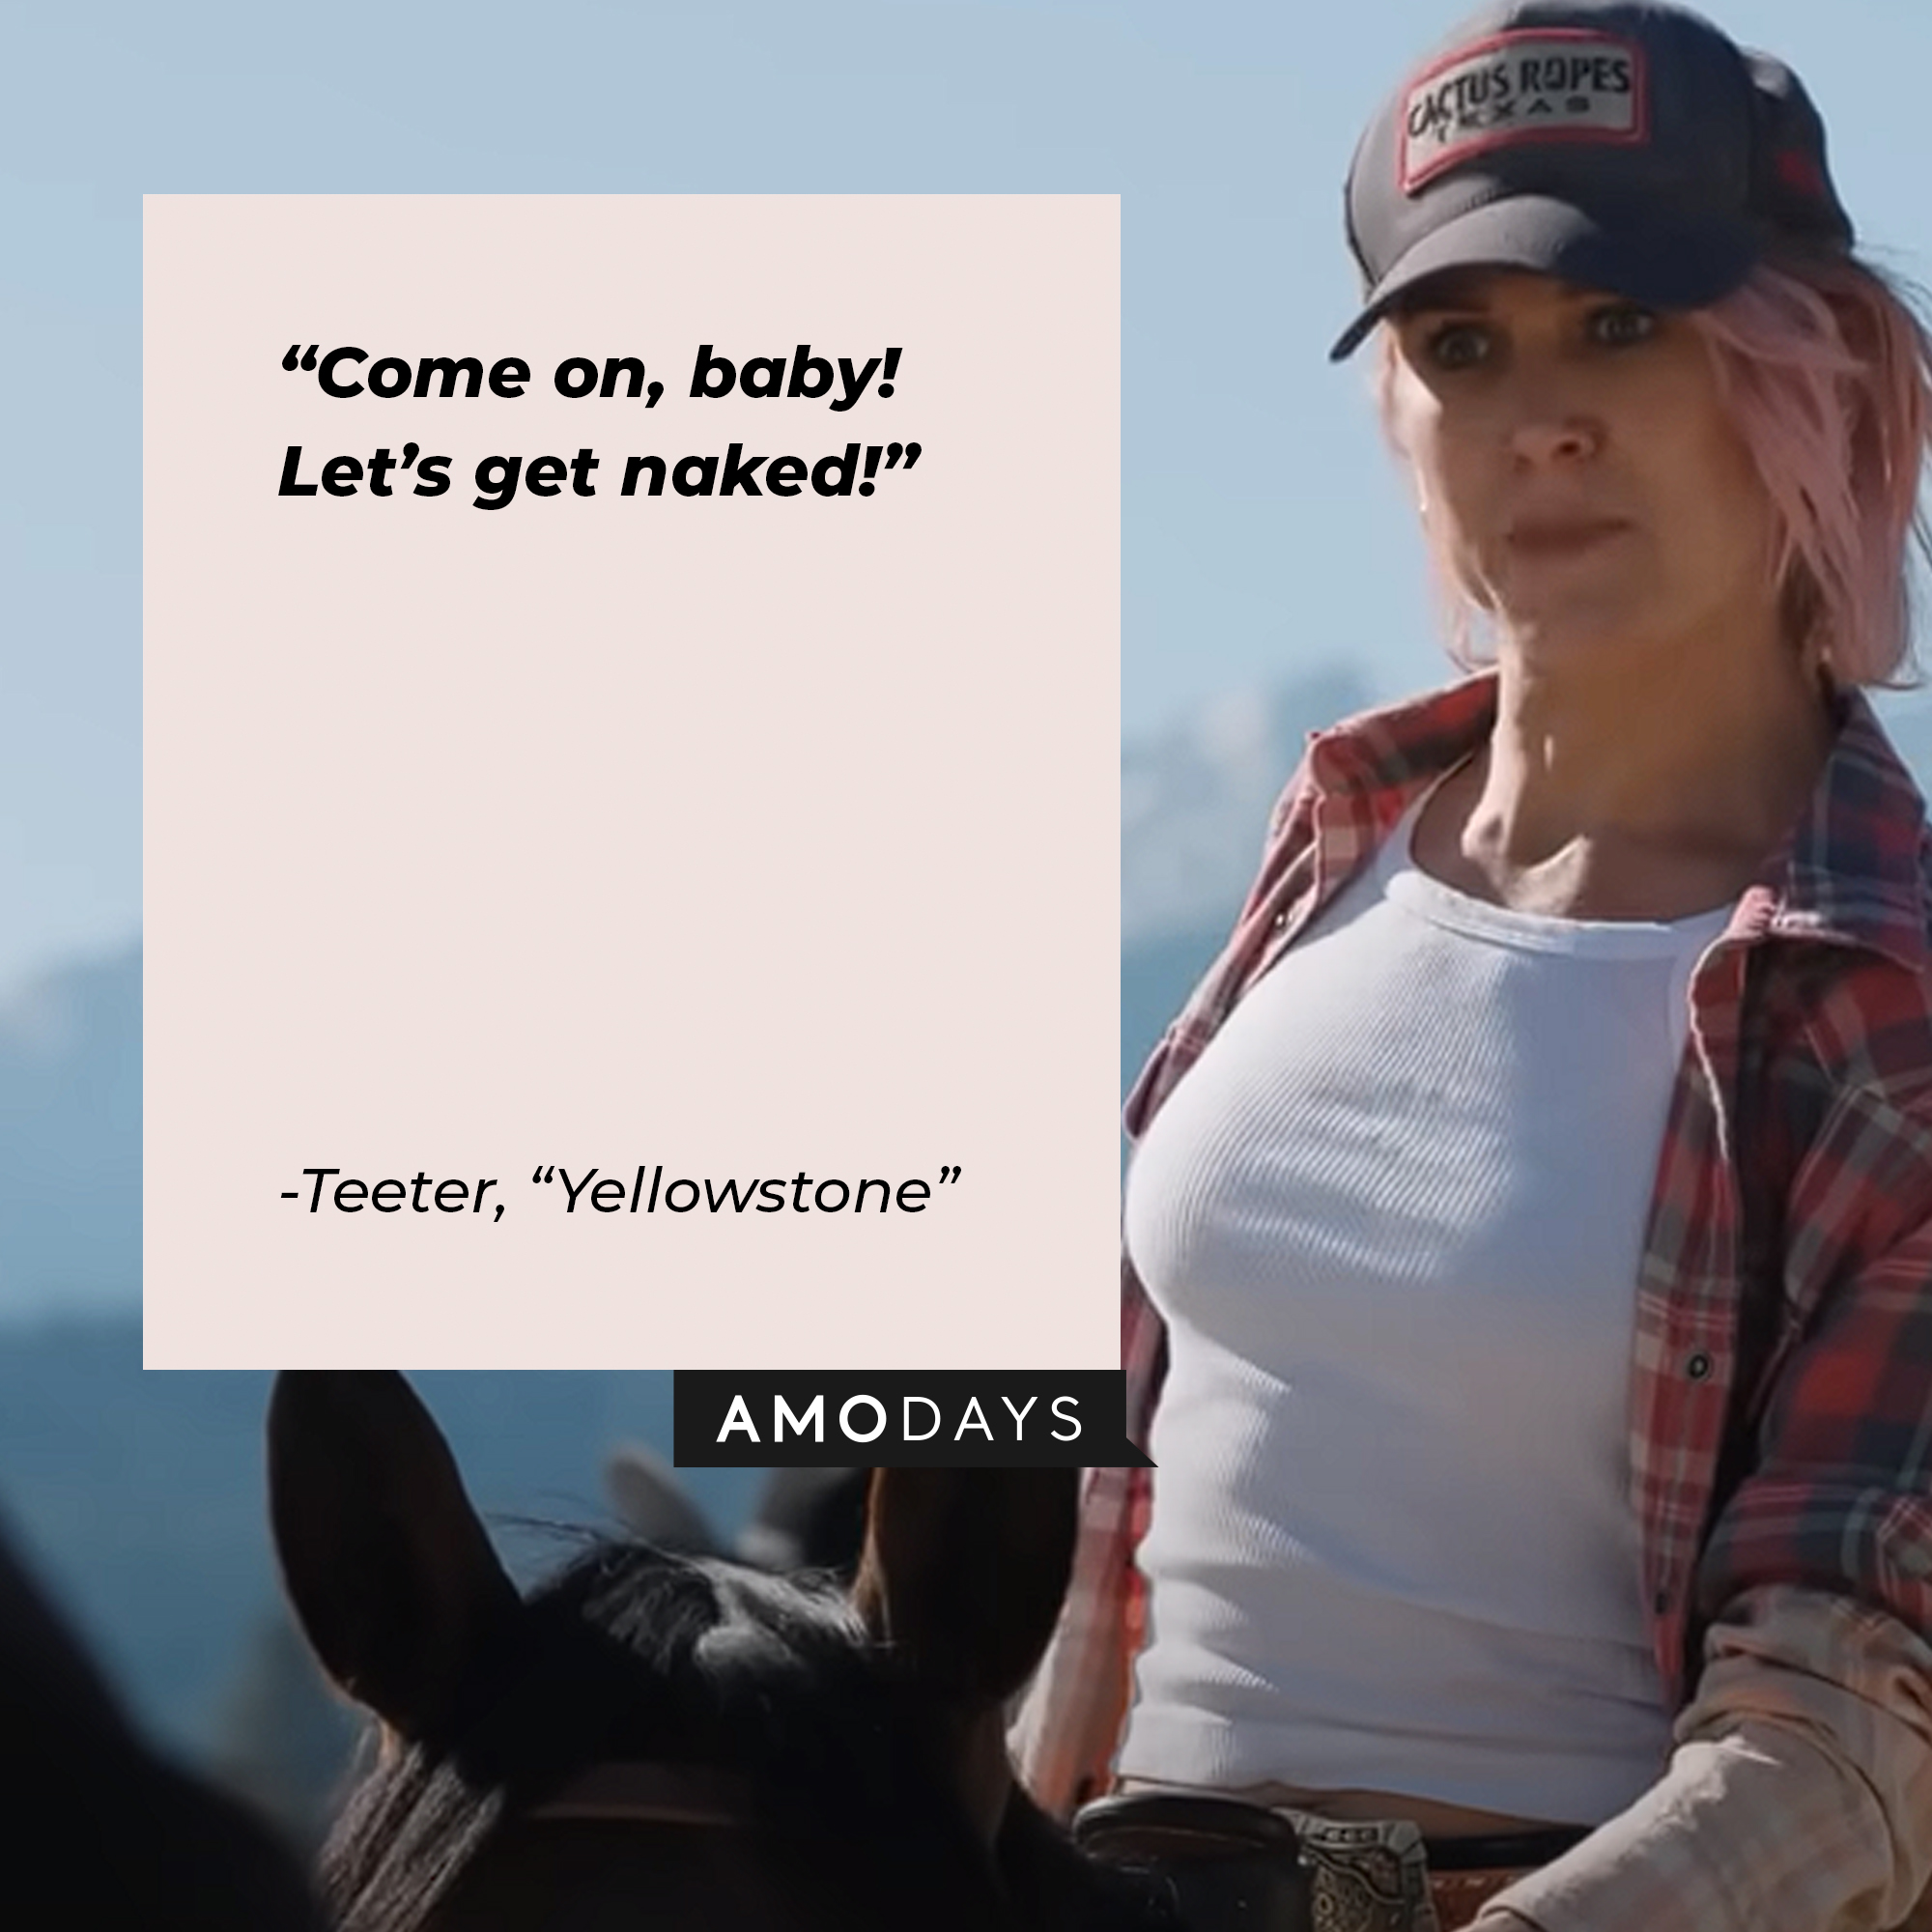 Teeter’s quote from “Yellowstone”: “Come on, baby! Let’s get naked!” | Source: youtube.com/yellowstone